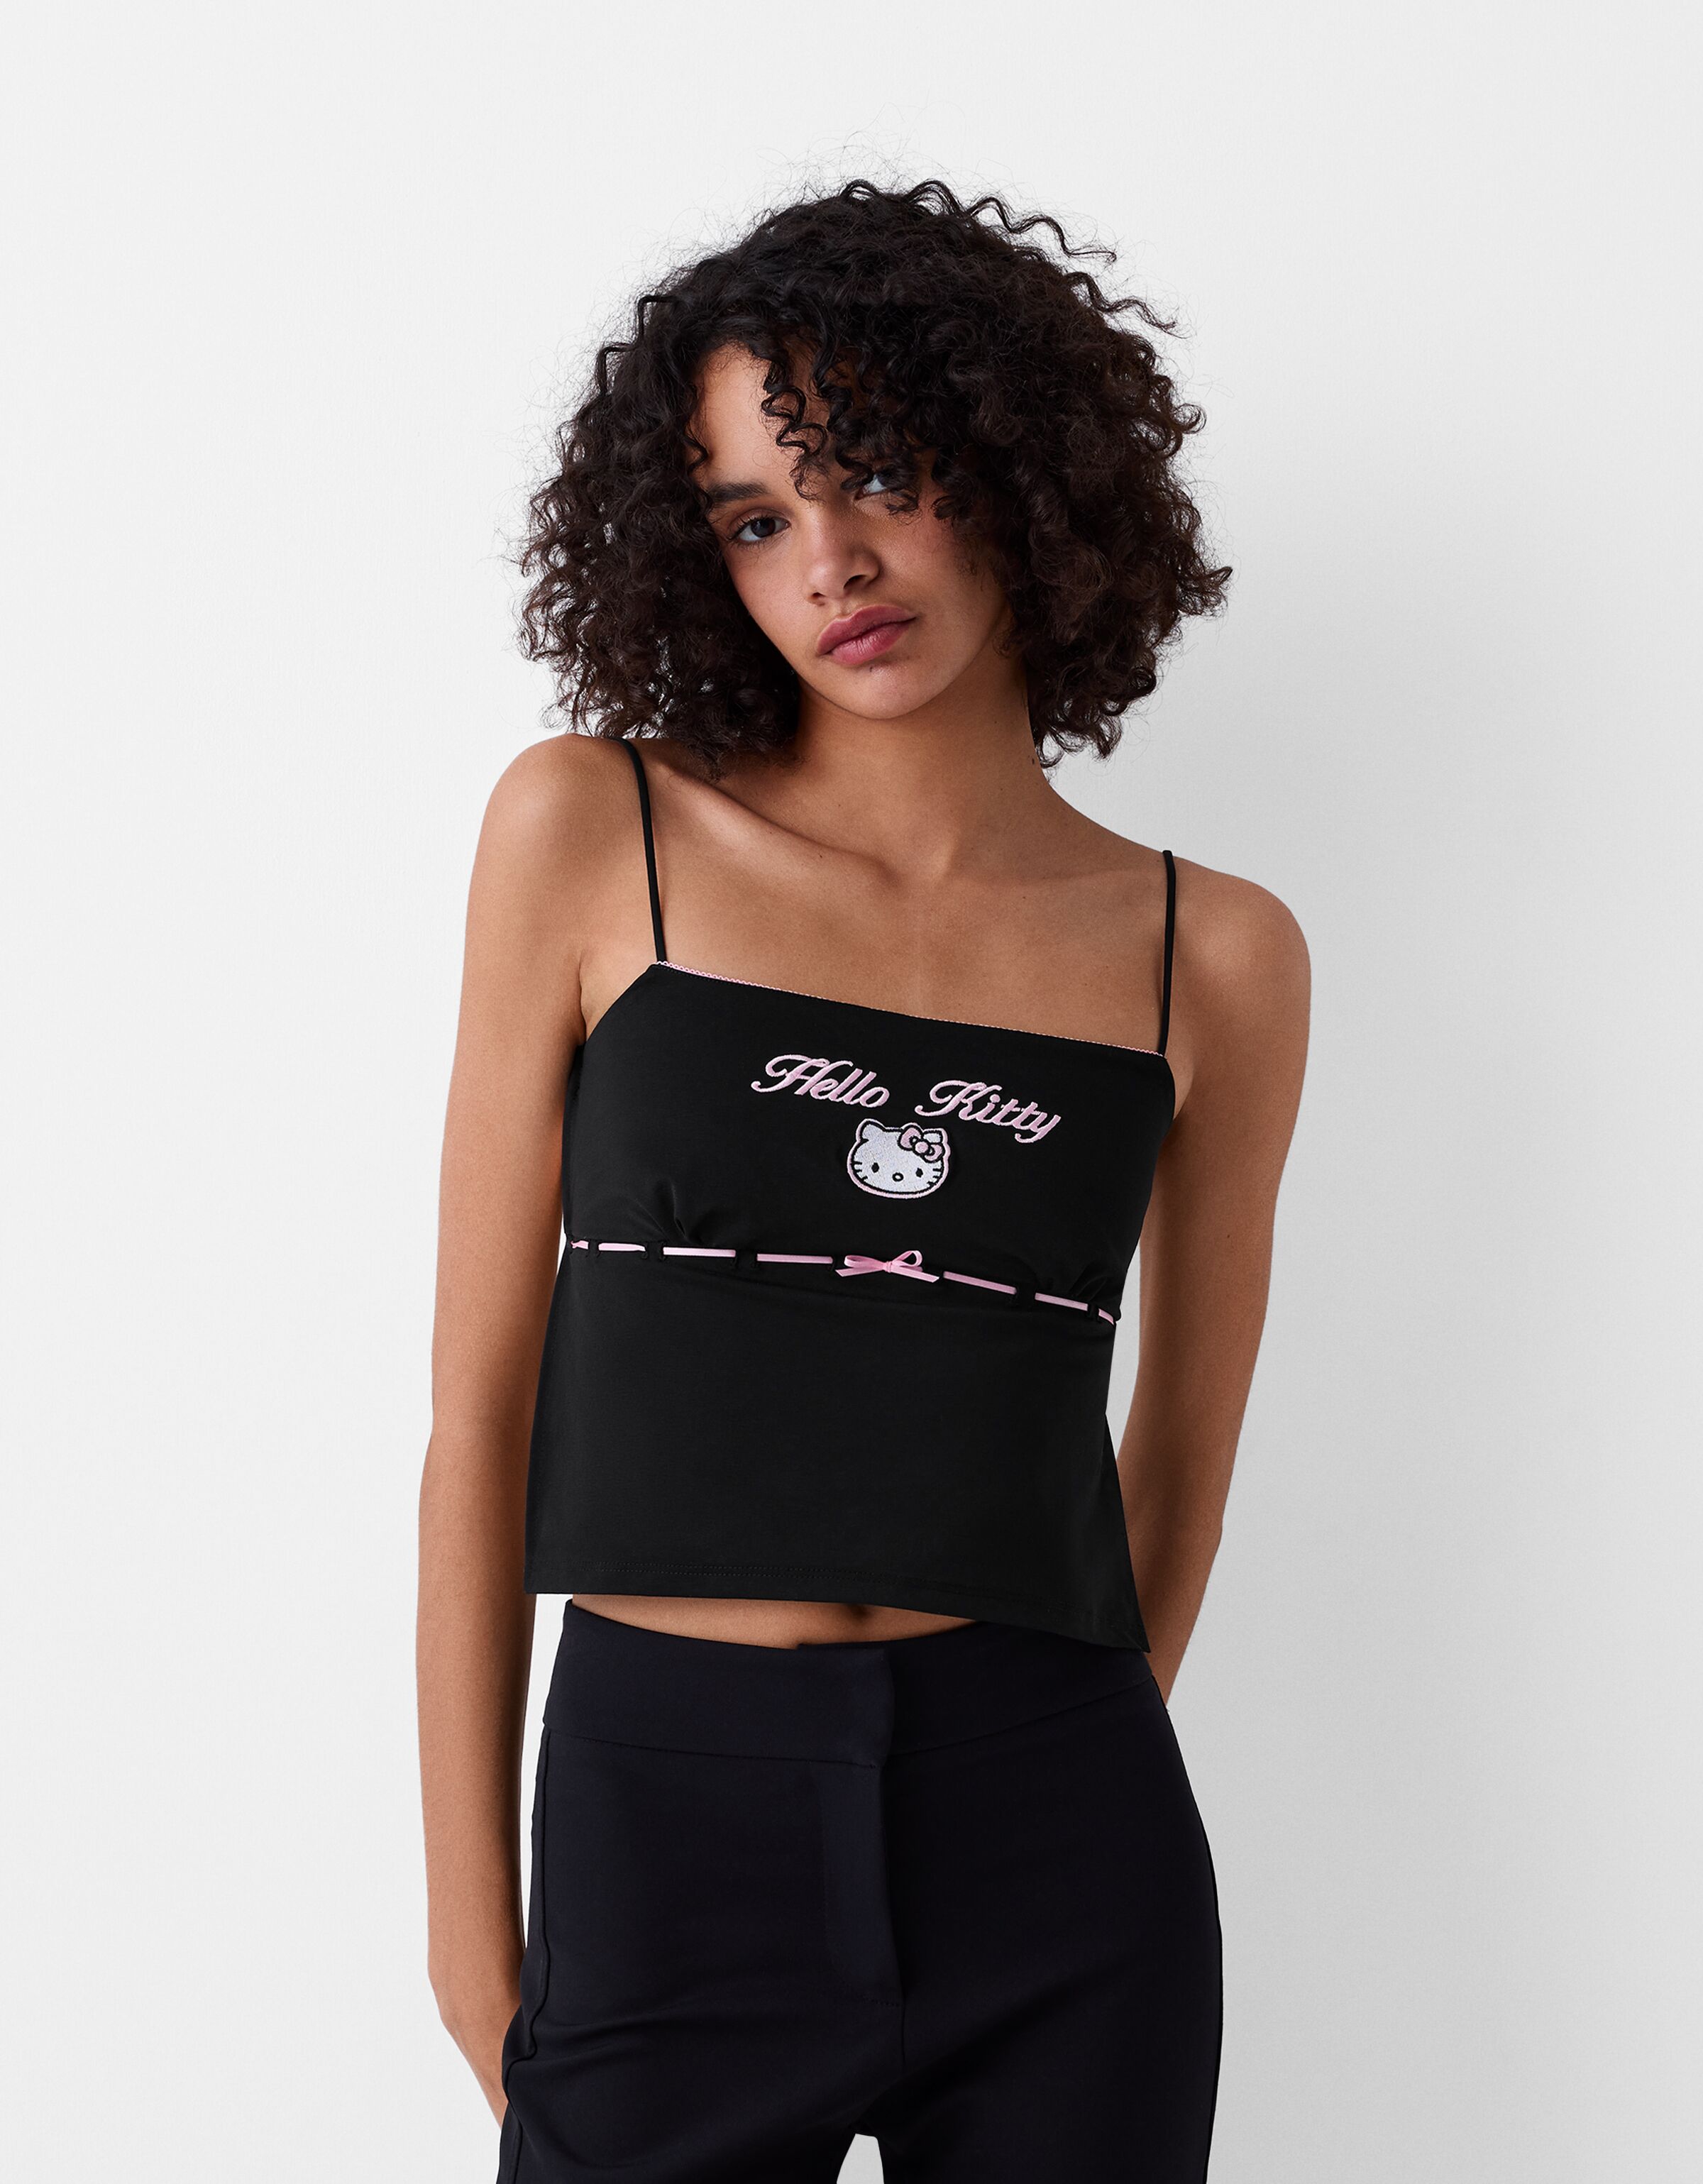 Women's Tops and Bodies | New Collection | BERSHKA